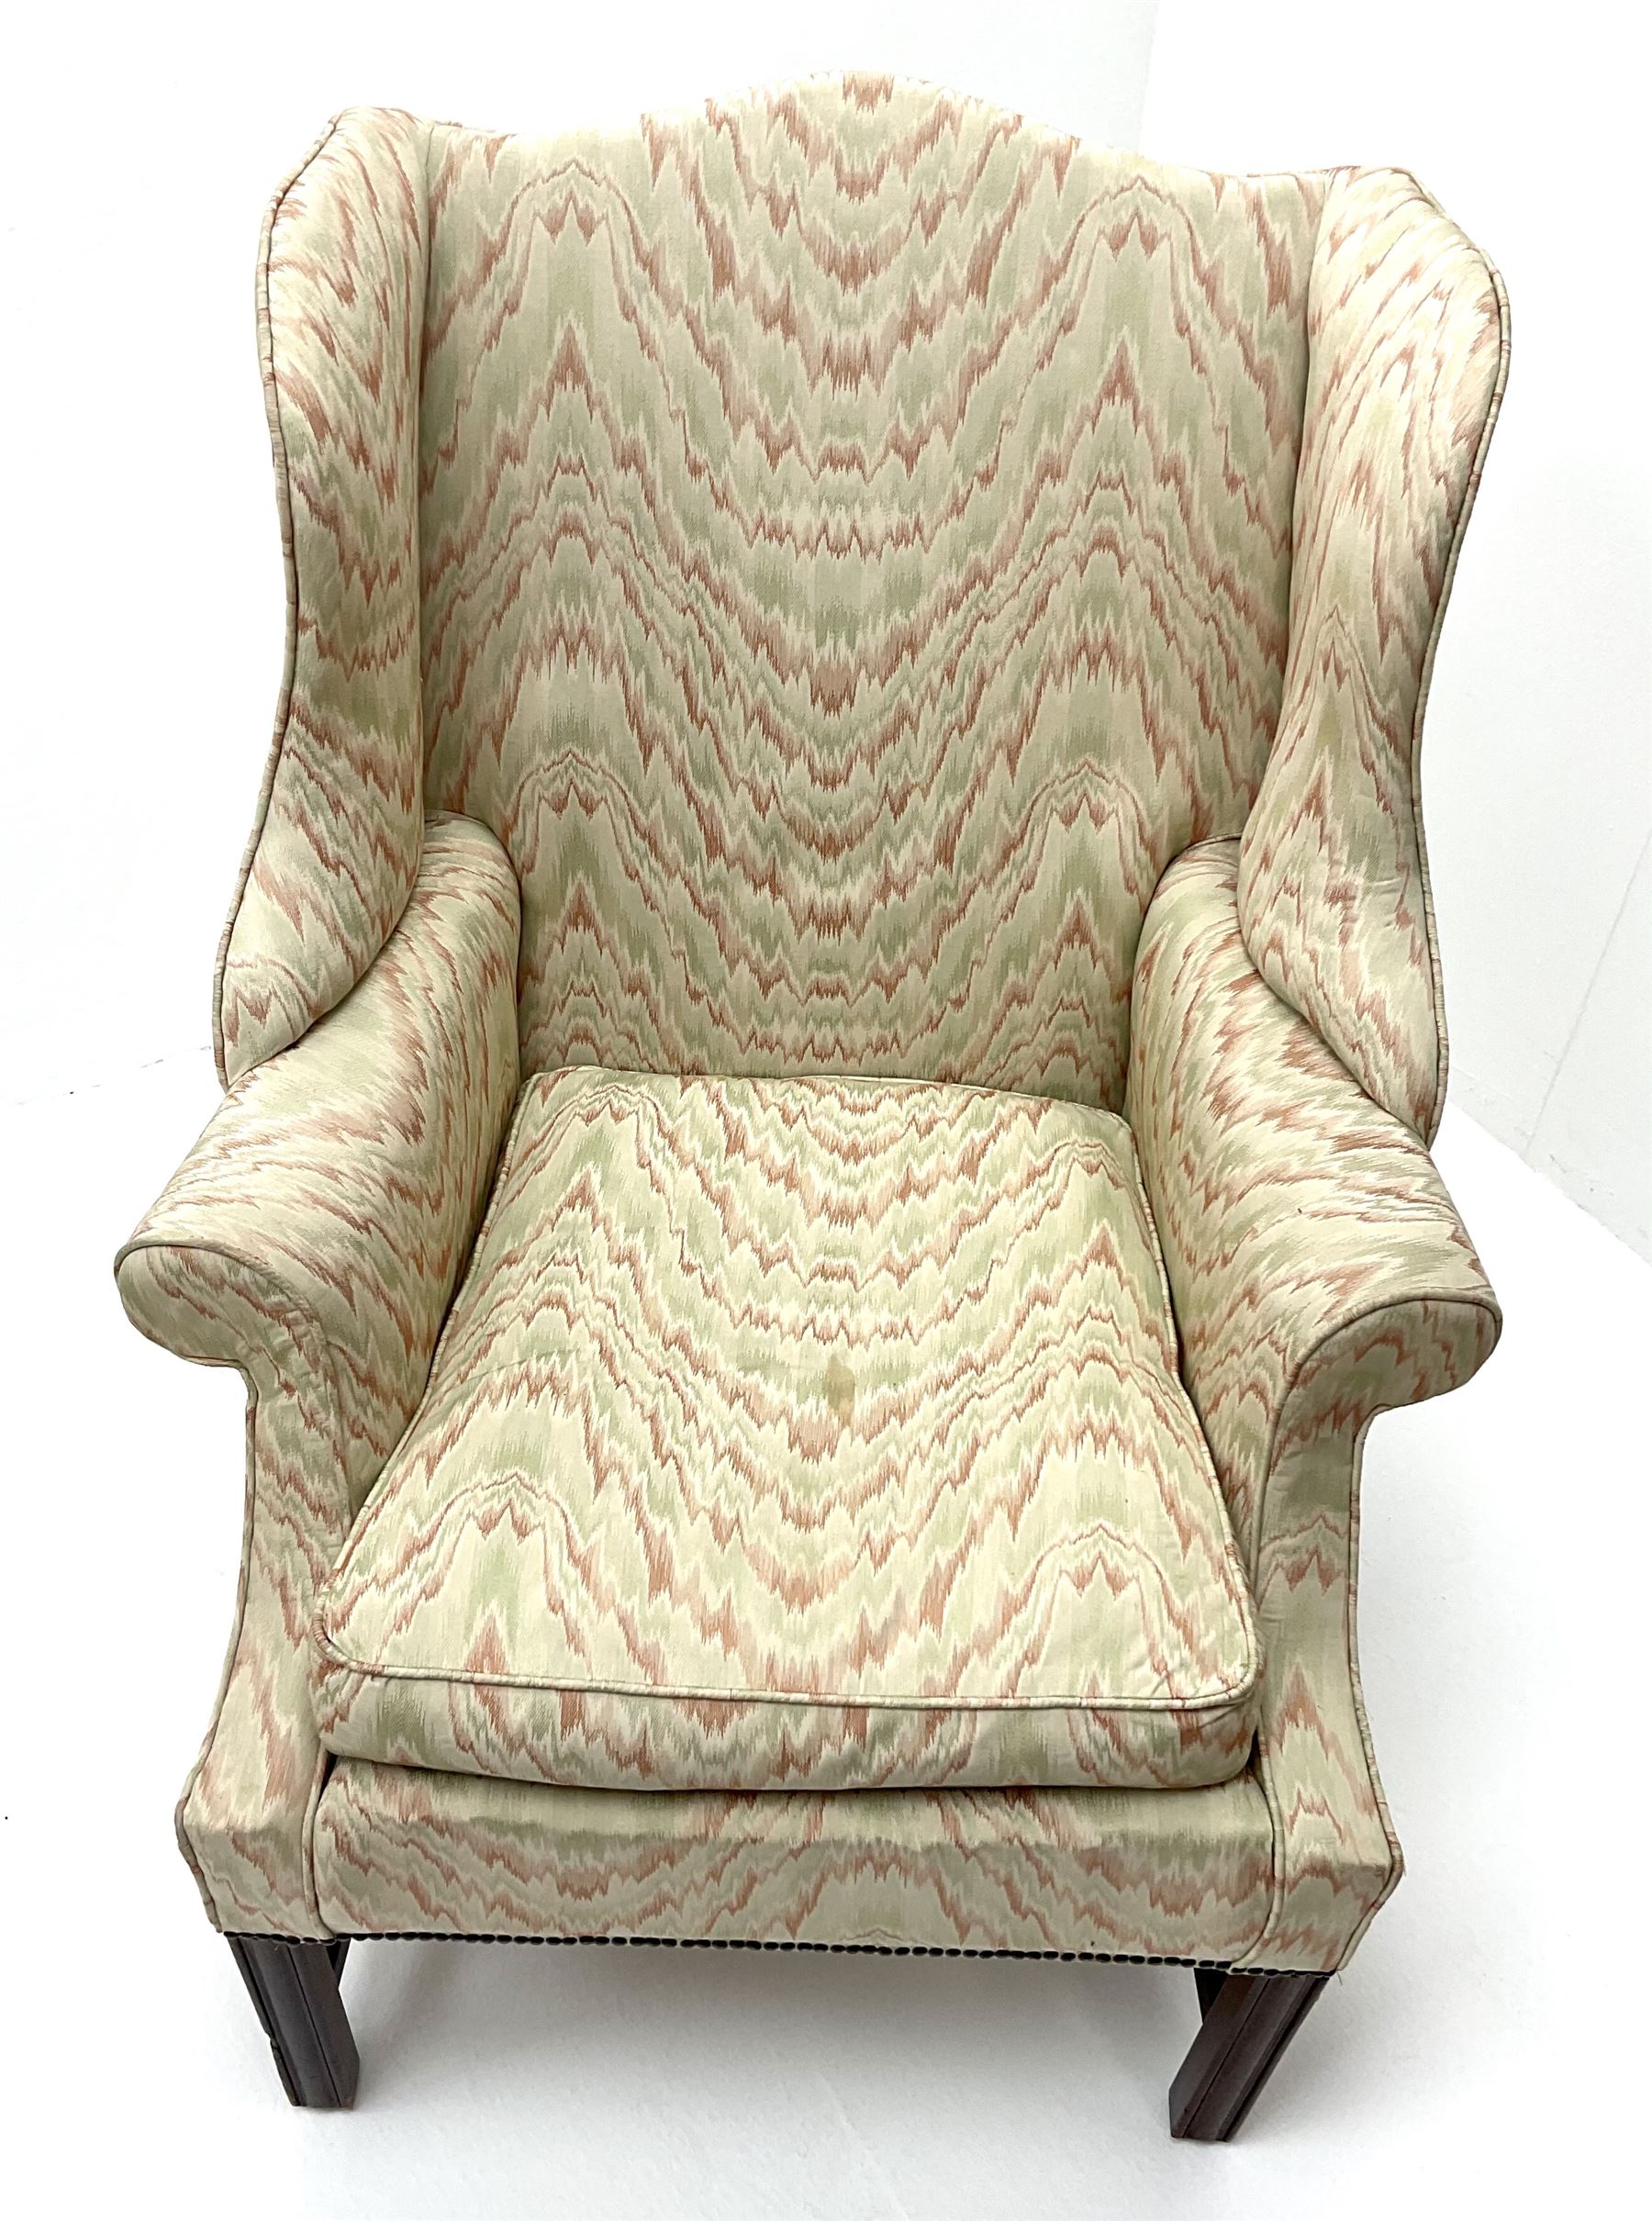 Georgian style mahogany framed wingback armchair upholstered in a beige ground fabric - Image 4 of 4